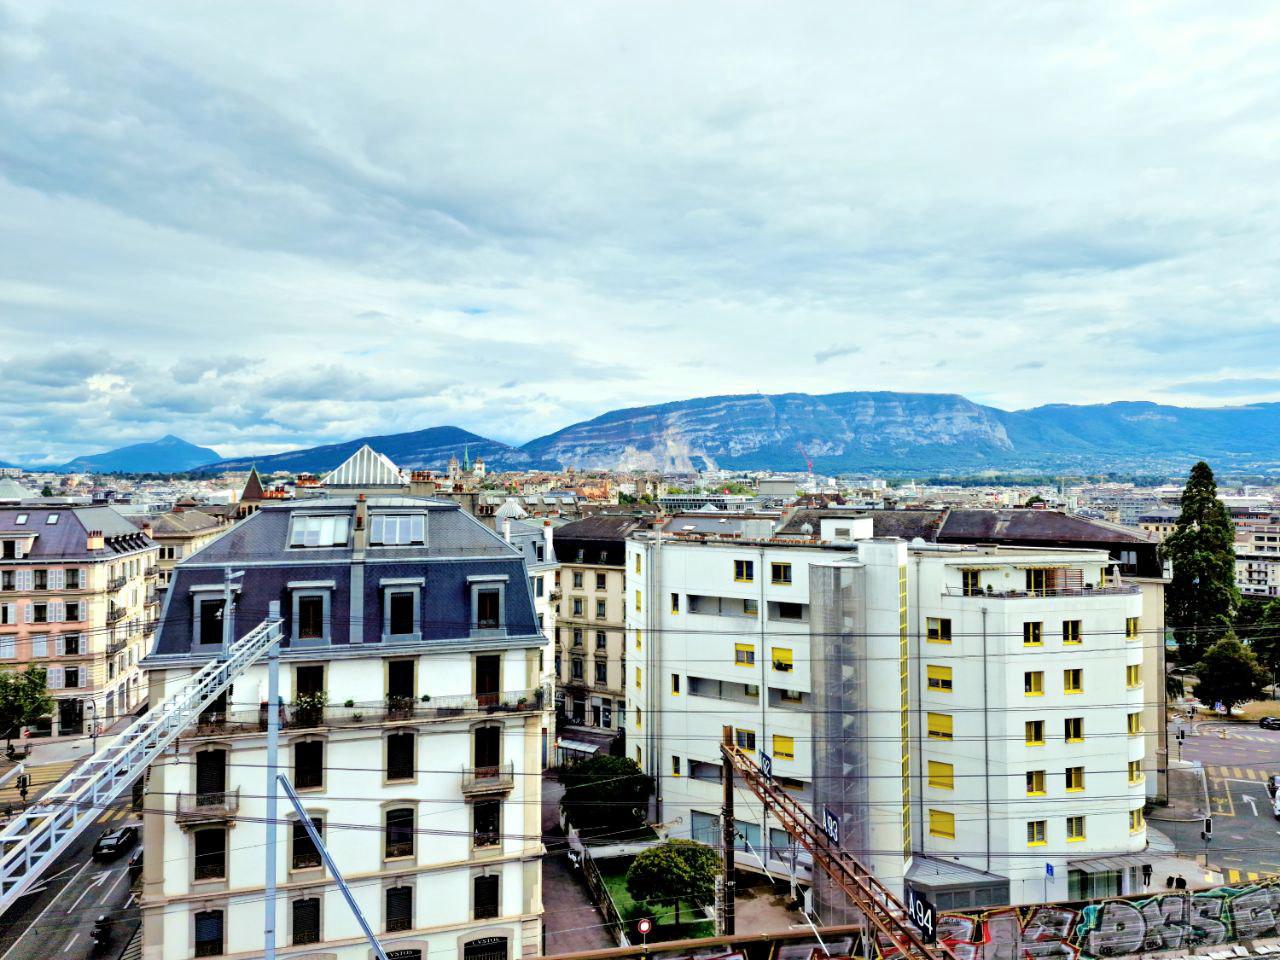 Splendid luxury flat in the heart of the city with breathtaking views over Geneva